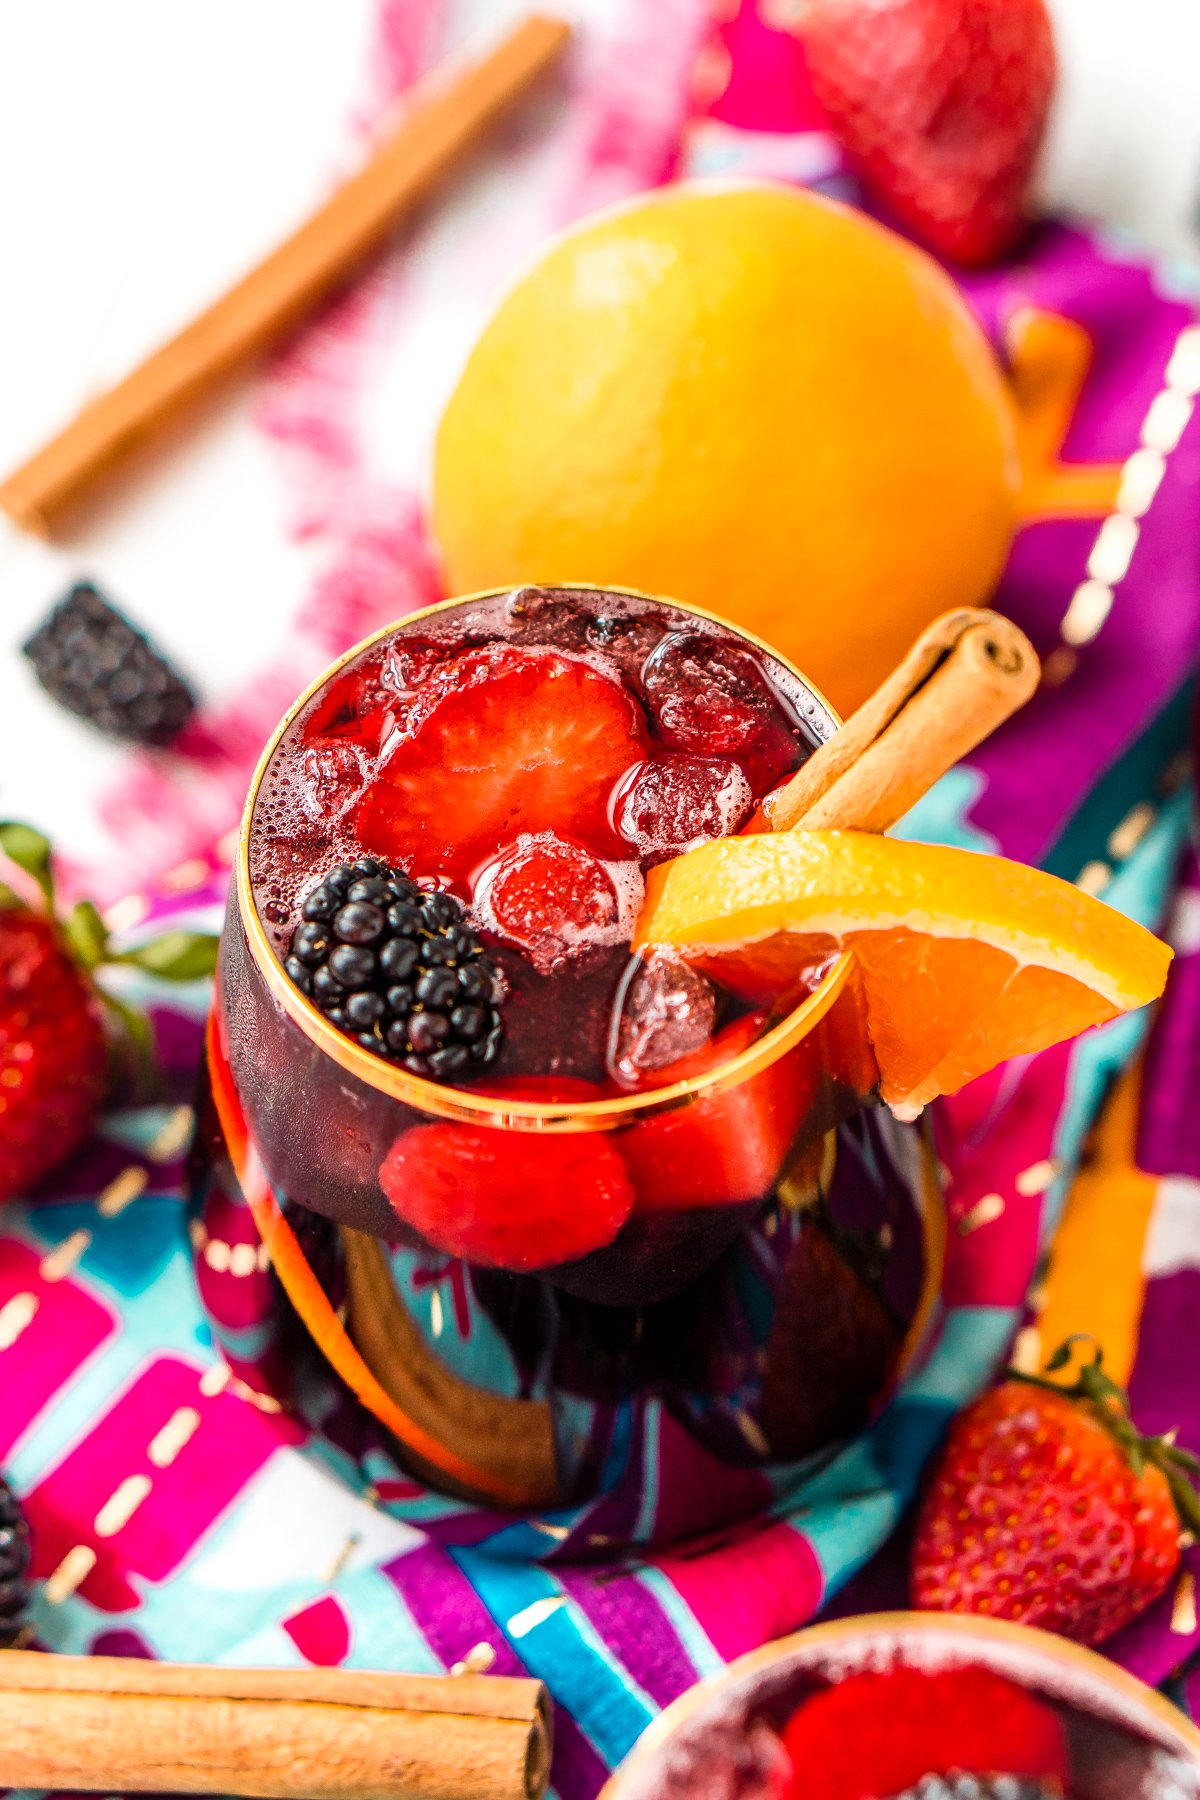 18 Easy Sangria Cocktail Recipes You Should Definitely Make The Xo Factor,What Can You Feed Ducks